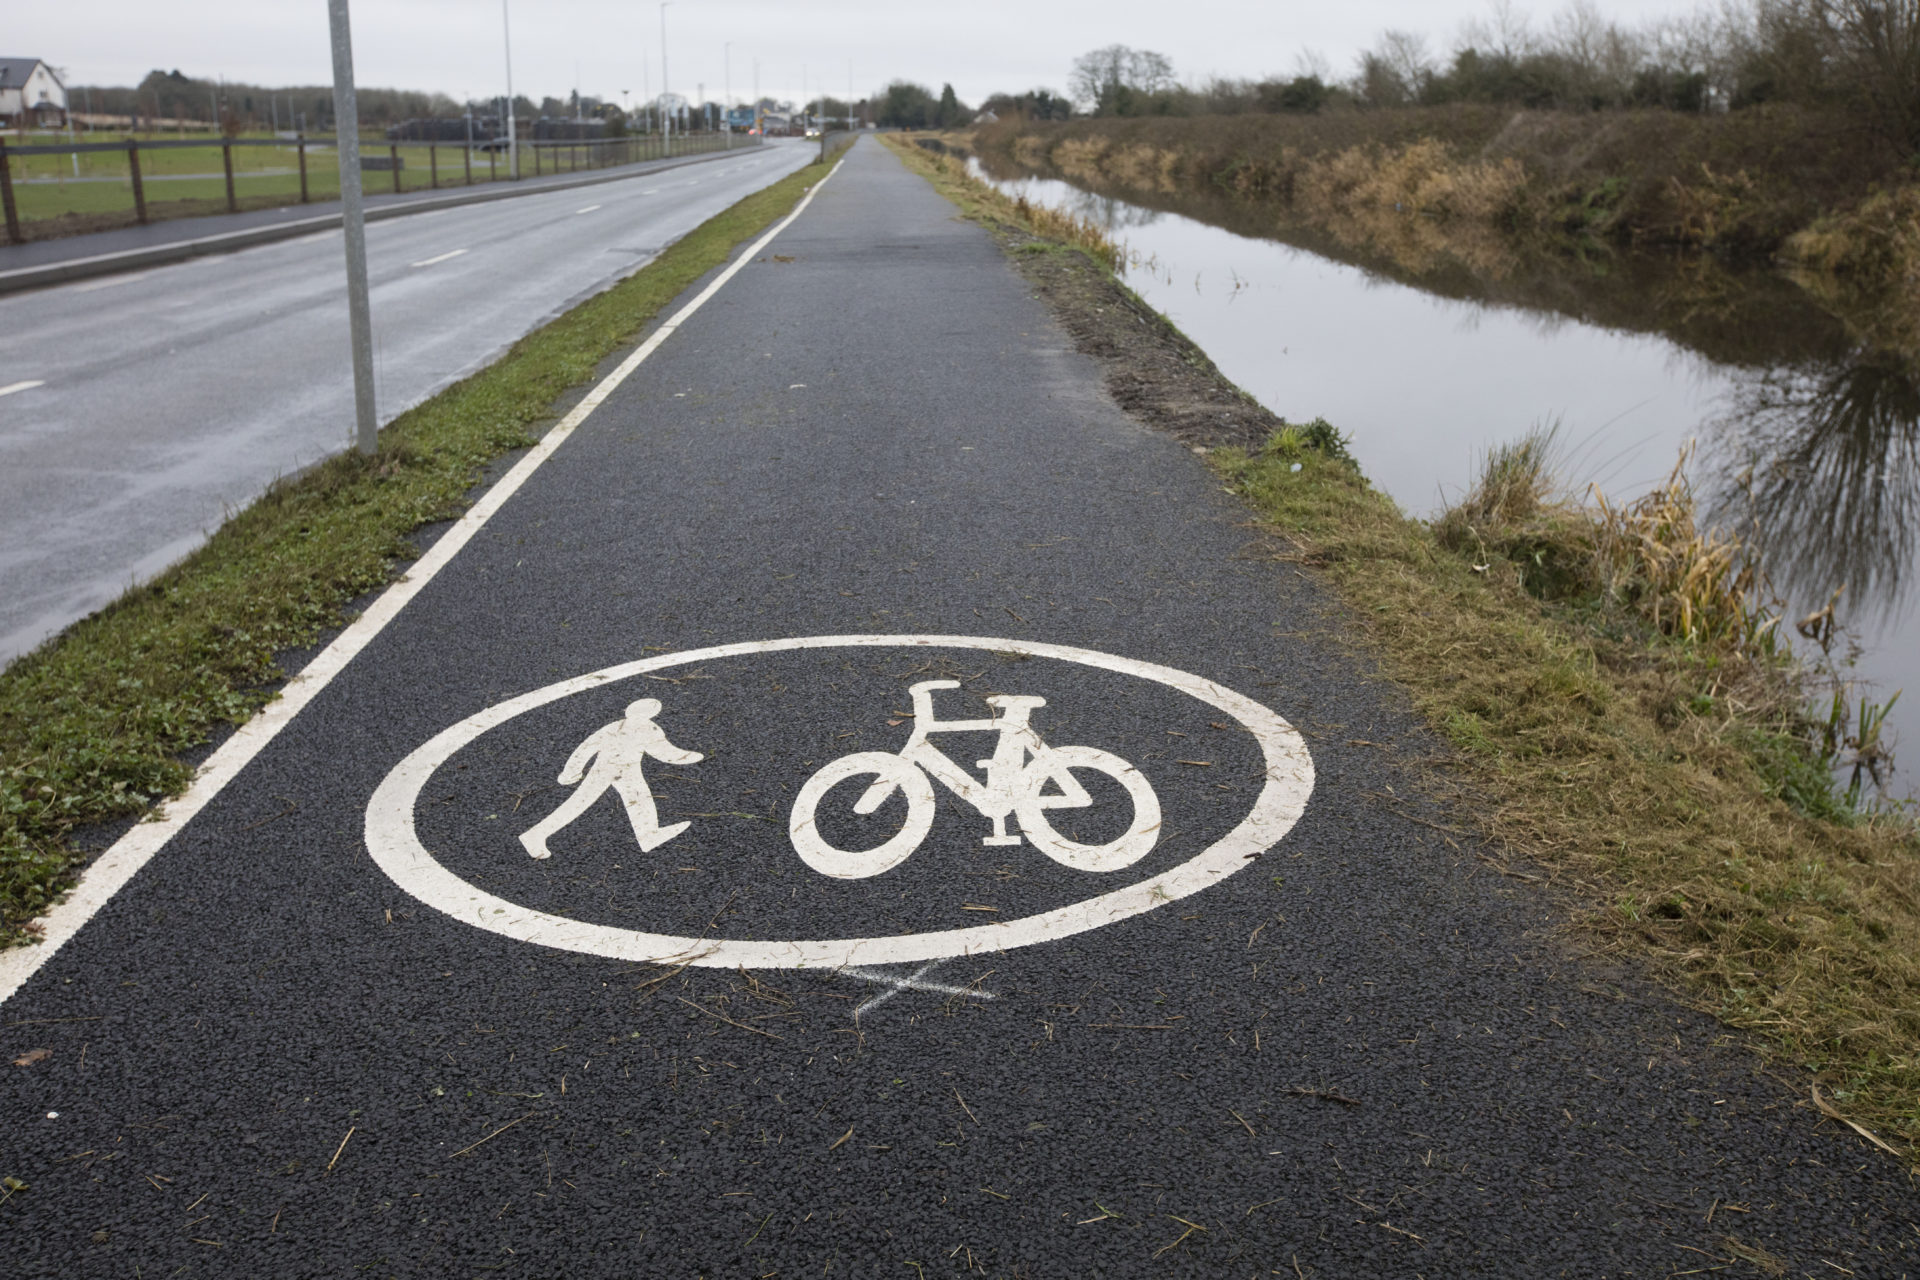 The Maynooth to Kilcock section of the Royal Canal Greenway, 20-12-17.